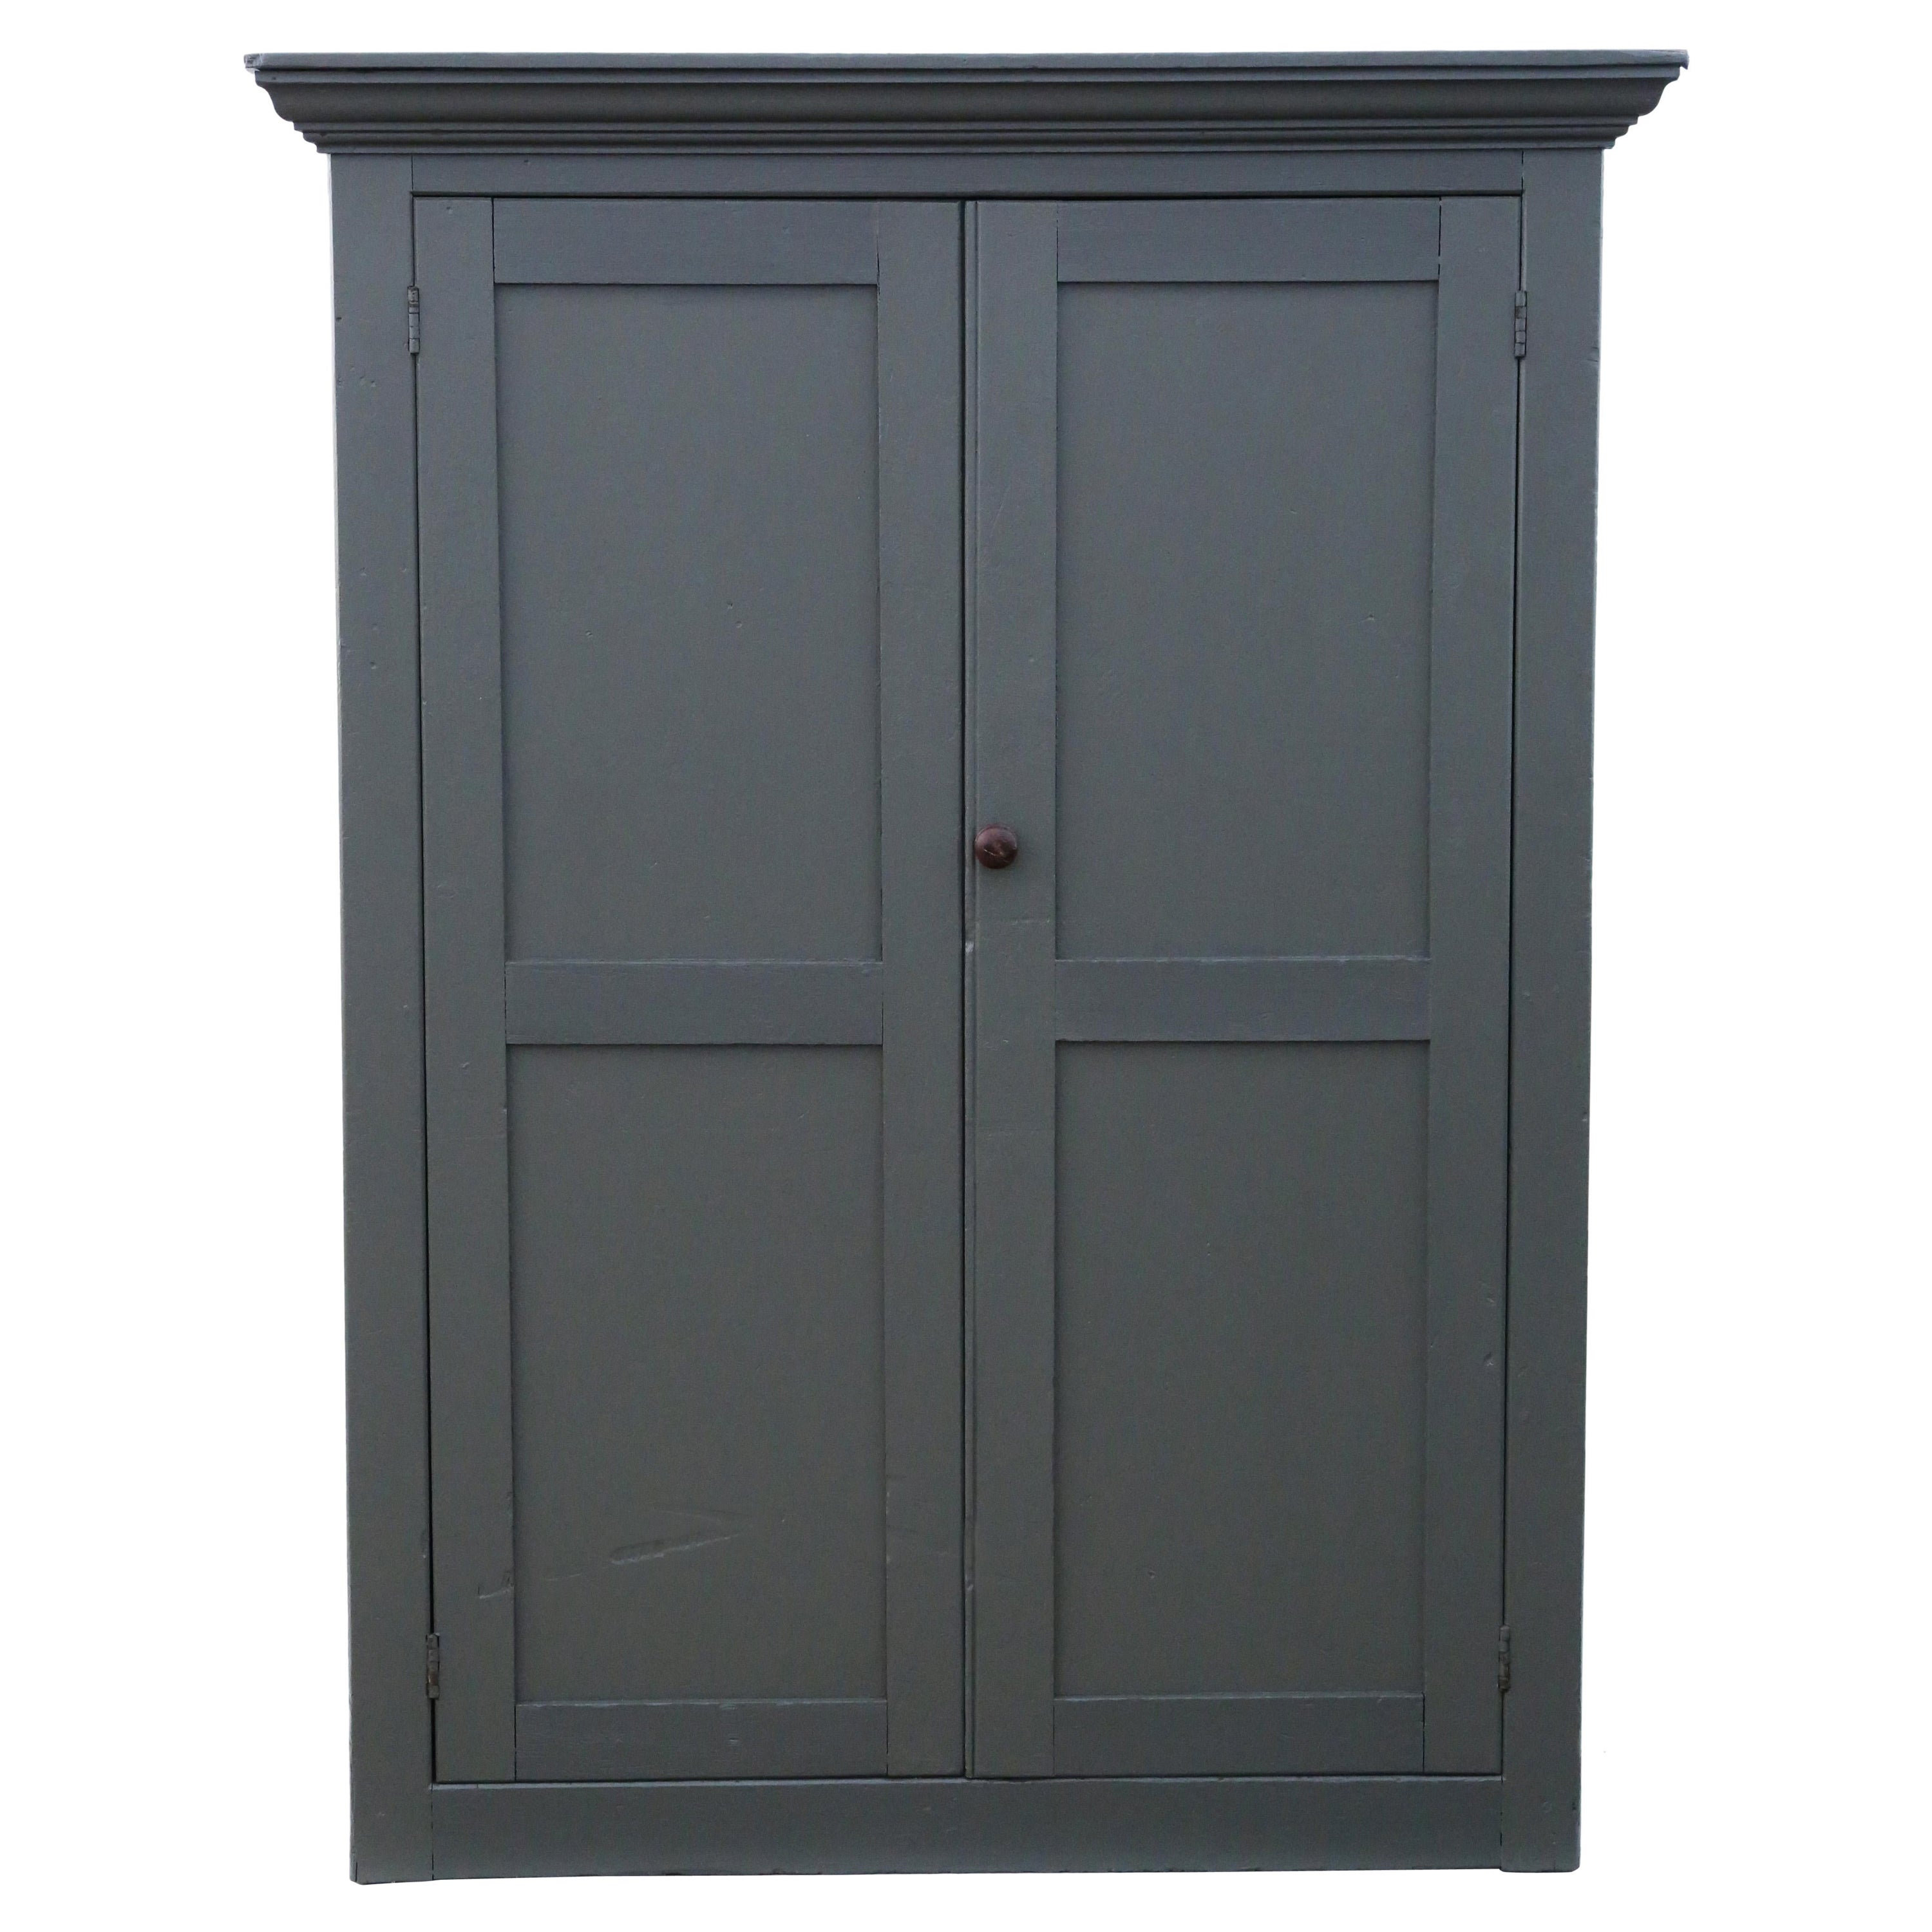 Antique quality 19th Century painted housekeeper's larder cupboard